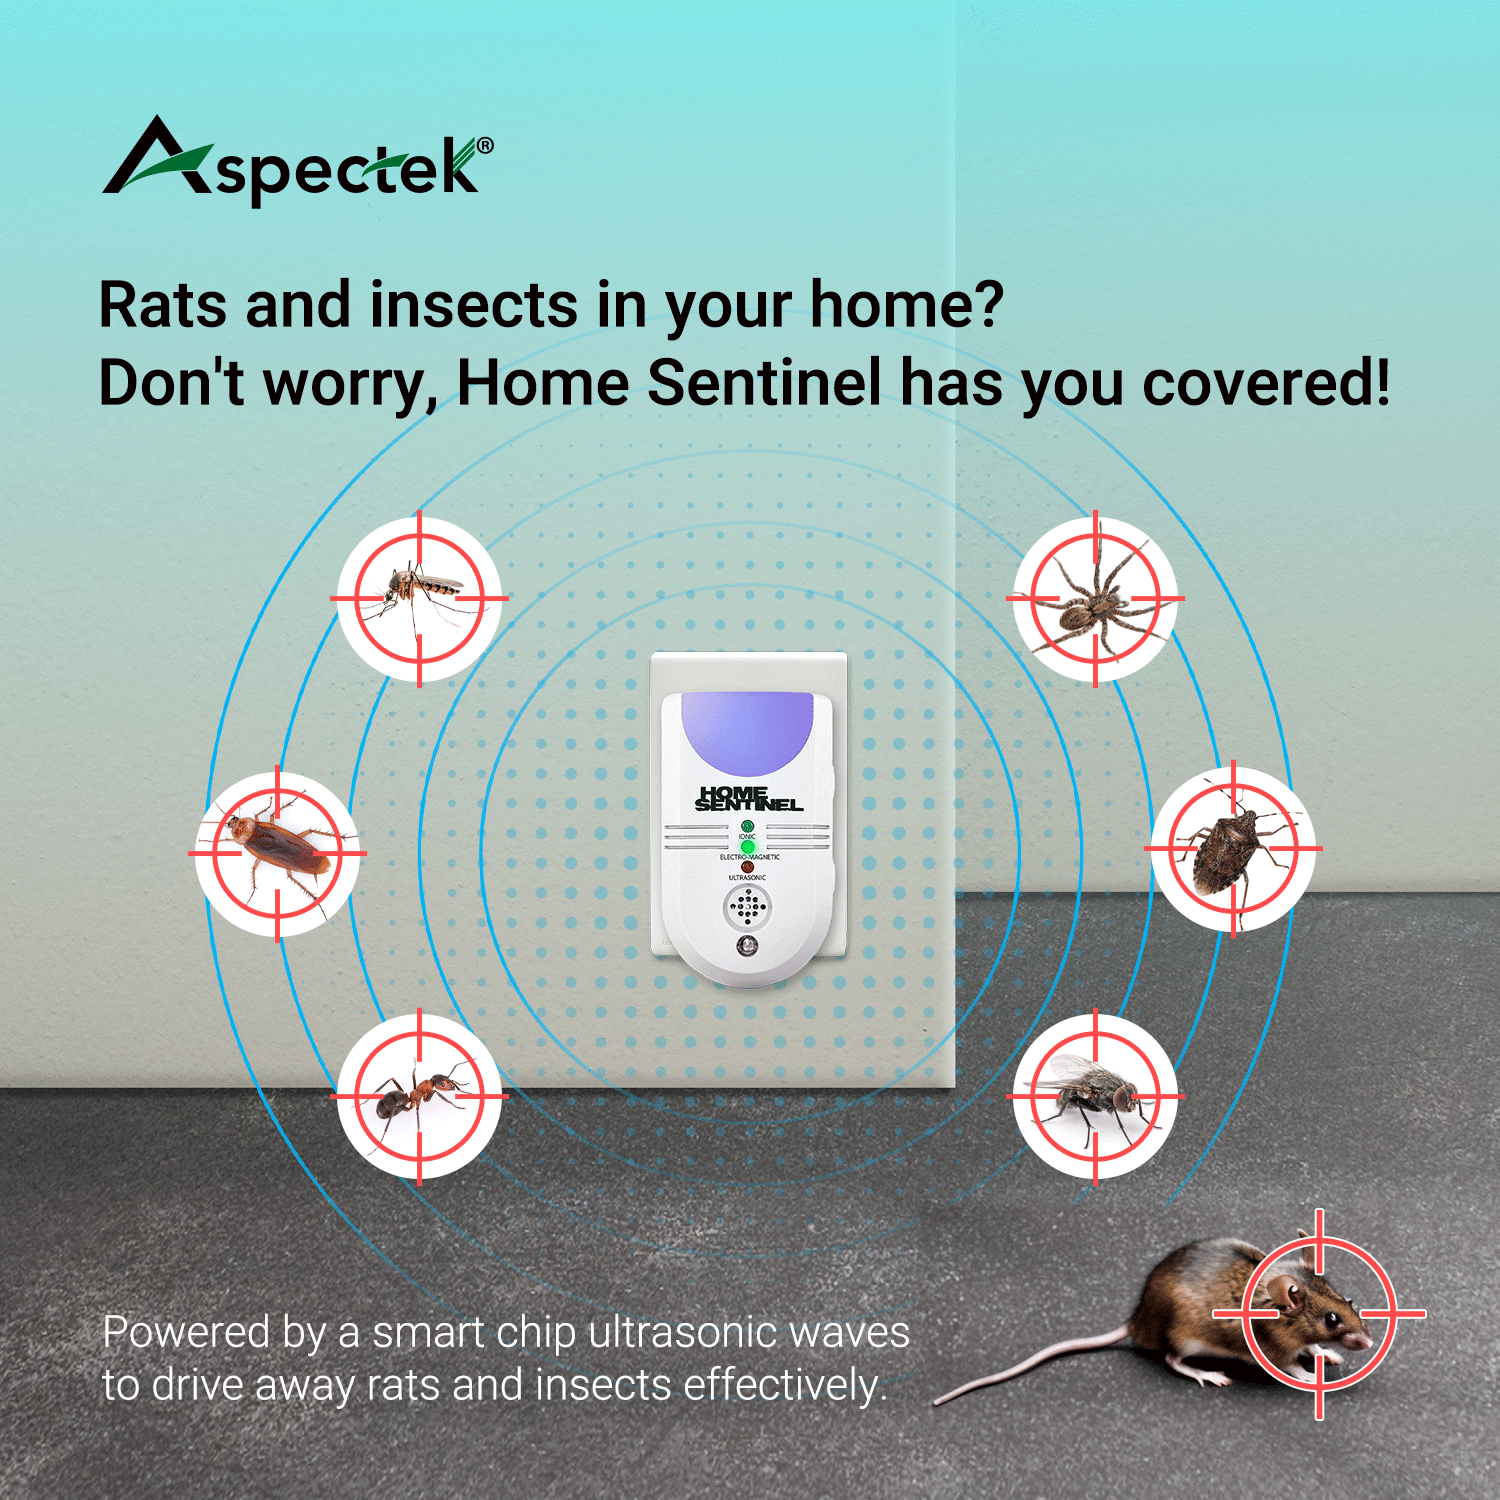 Transform Your Home into a Pest-Free Haven with Home Sentinel Indoor Ultrasonic Pest Repeller